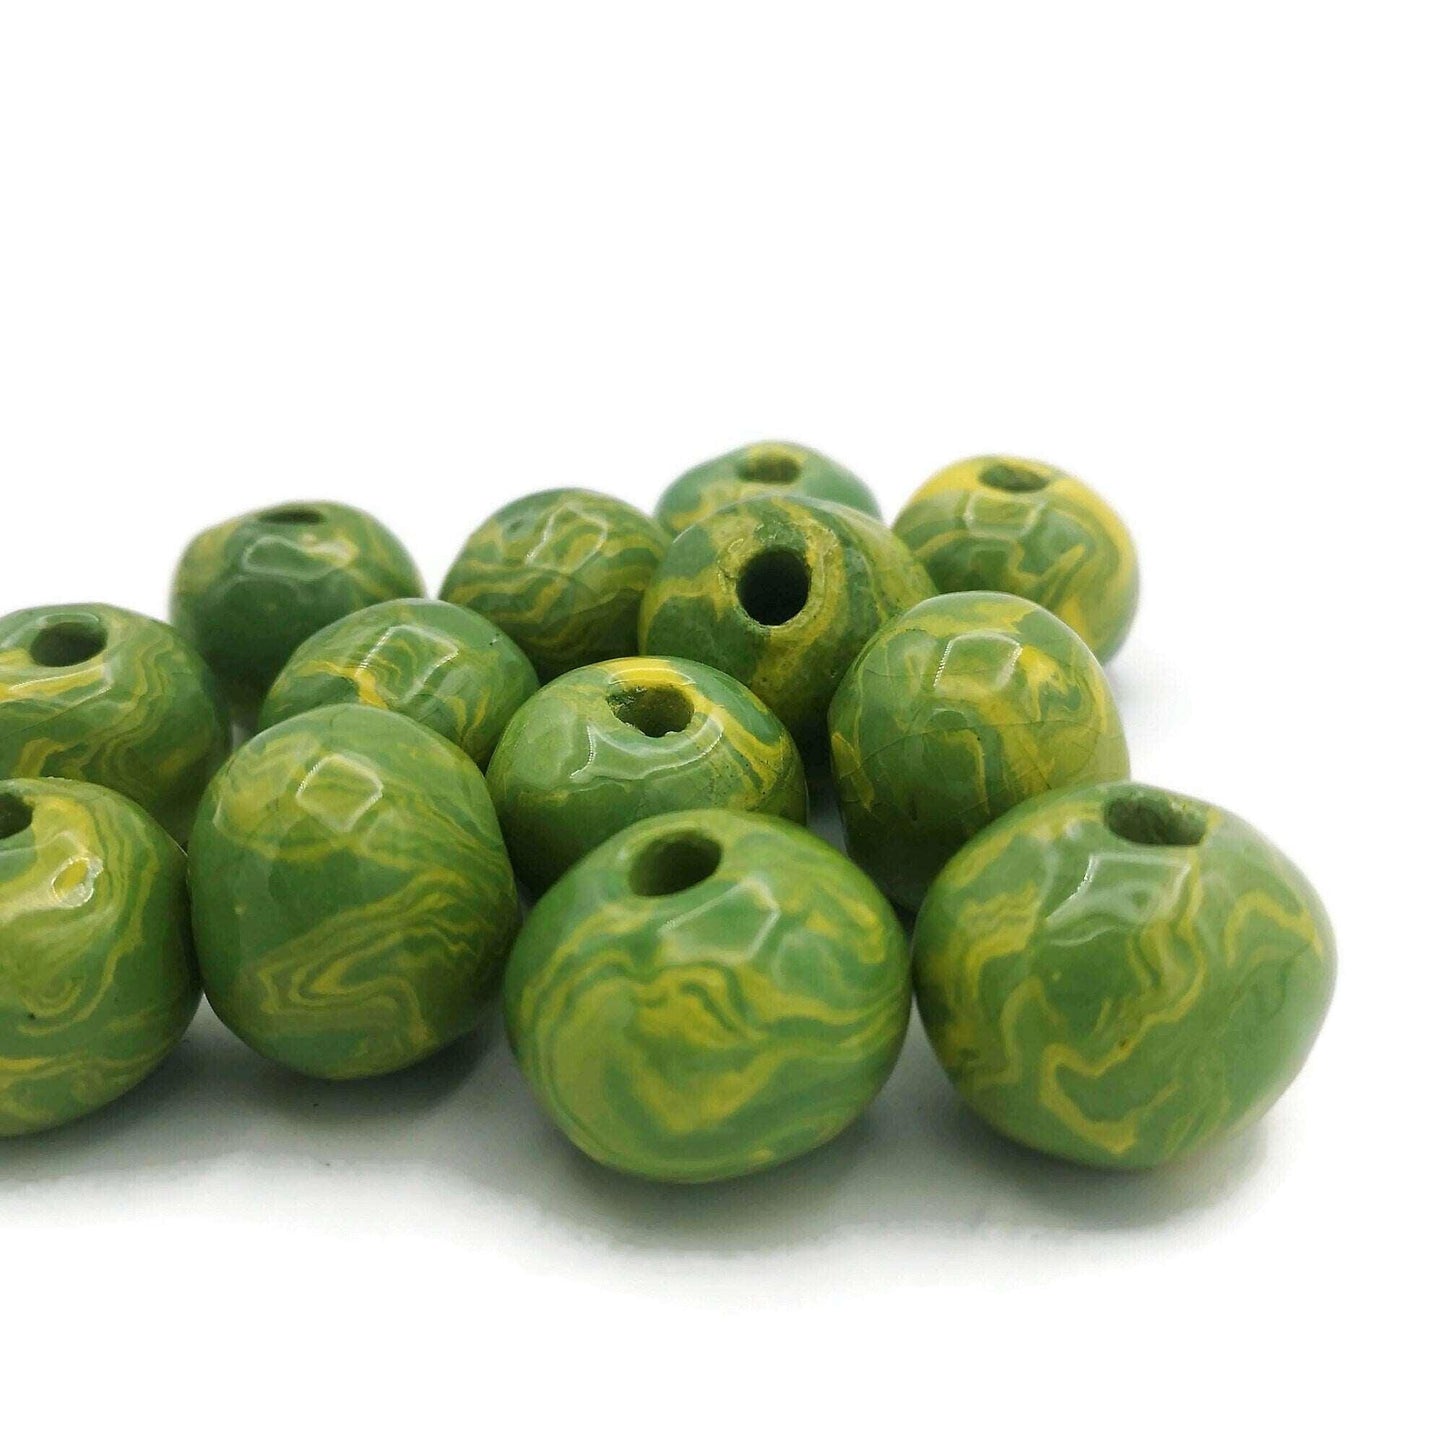 1Pc Handmade Ceramic Macrame Beads 7mm Large Hole, Marbled Green And Yellow Clay Beads, Extra Large Beads 30mm